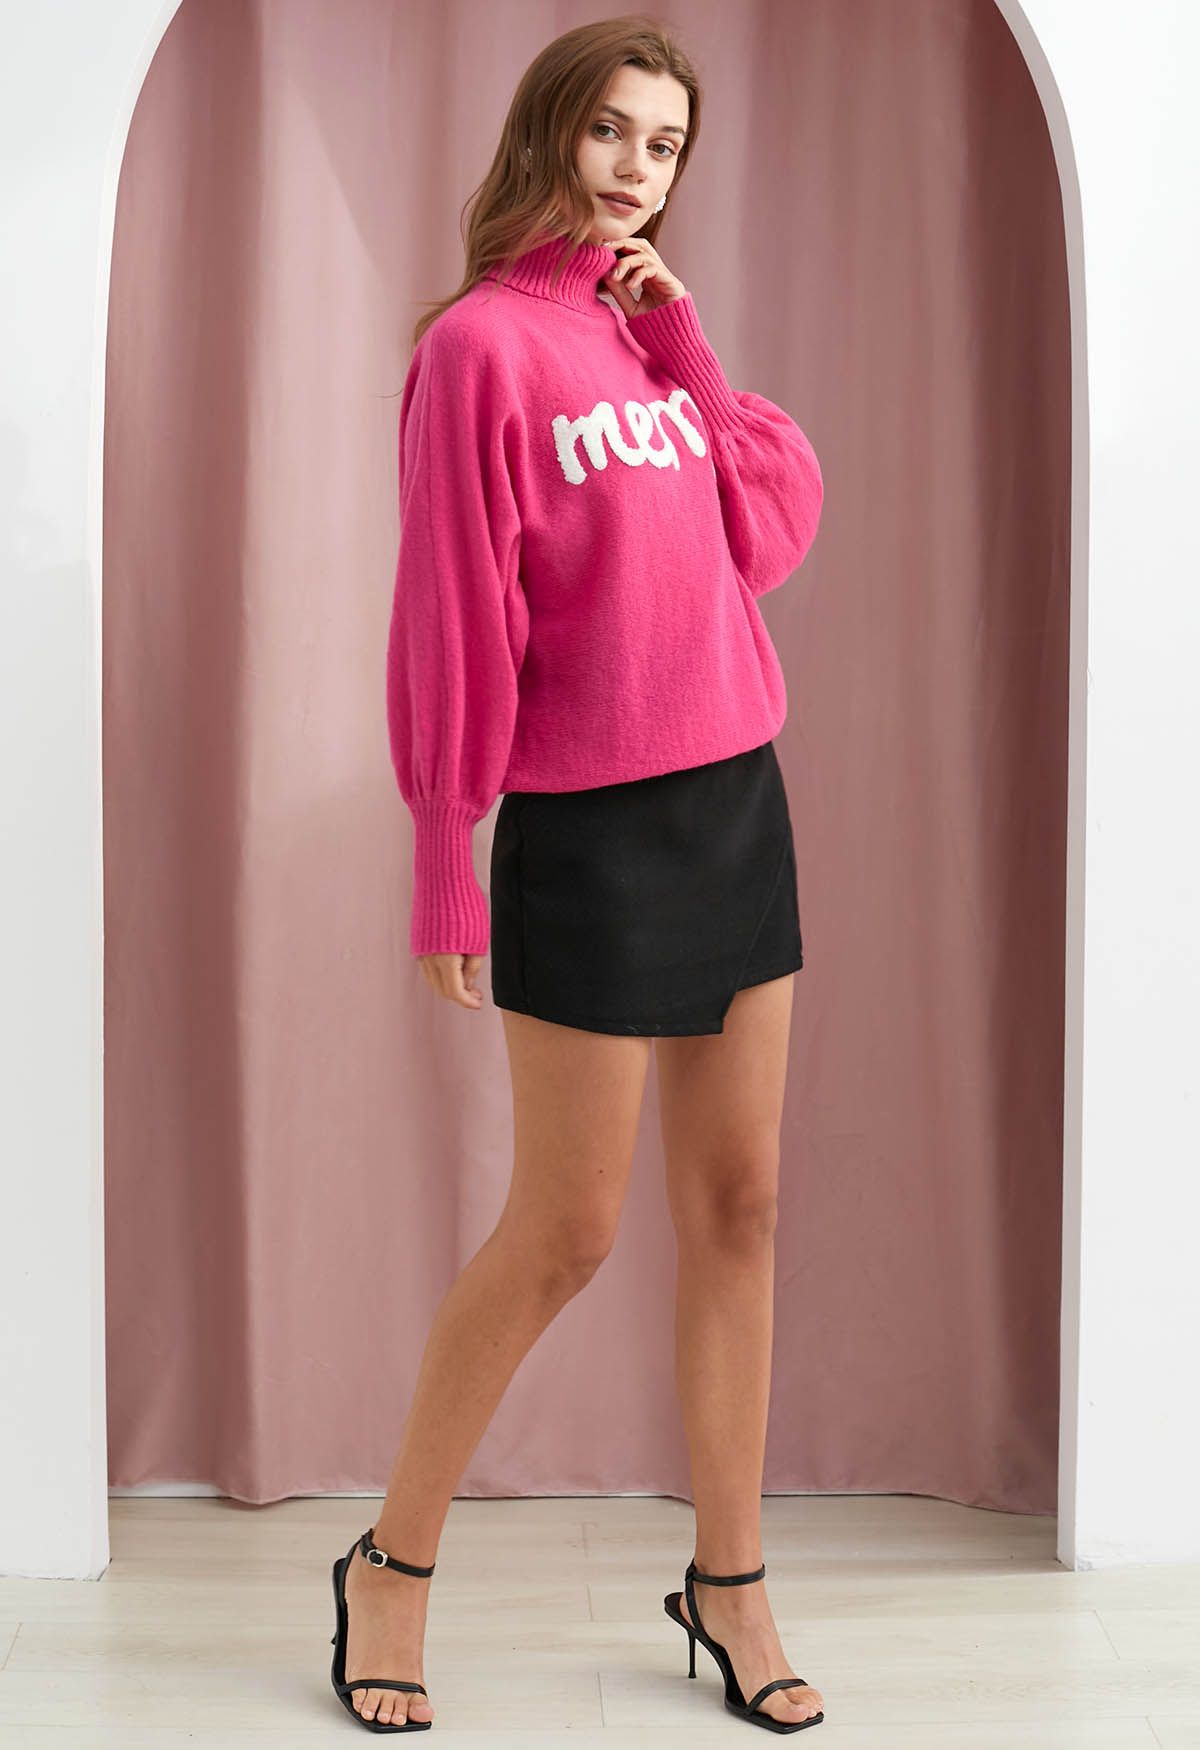 Merry Turtleneck Batwing Sleeve Knit Sweater in Hot Pink